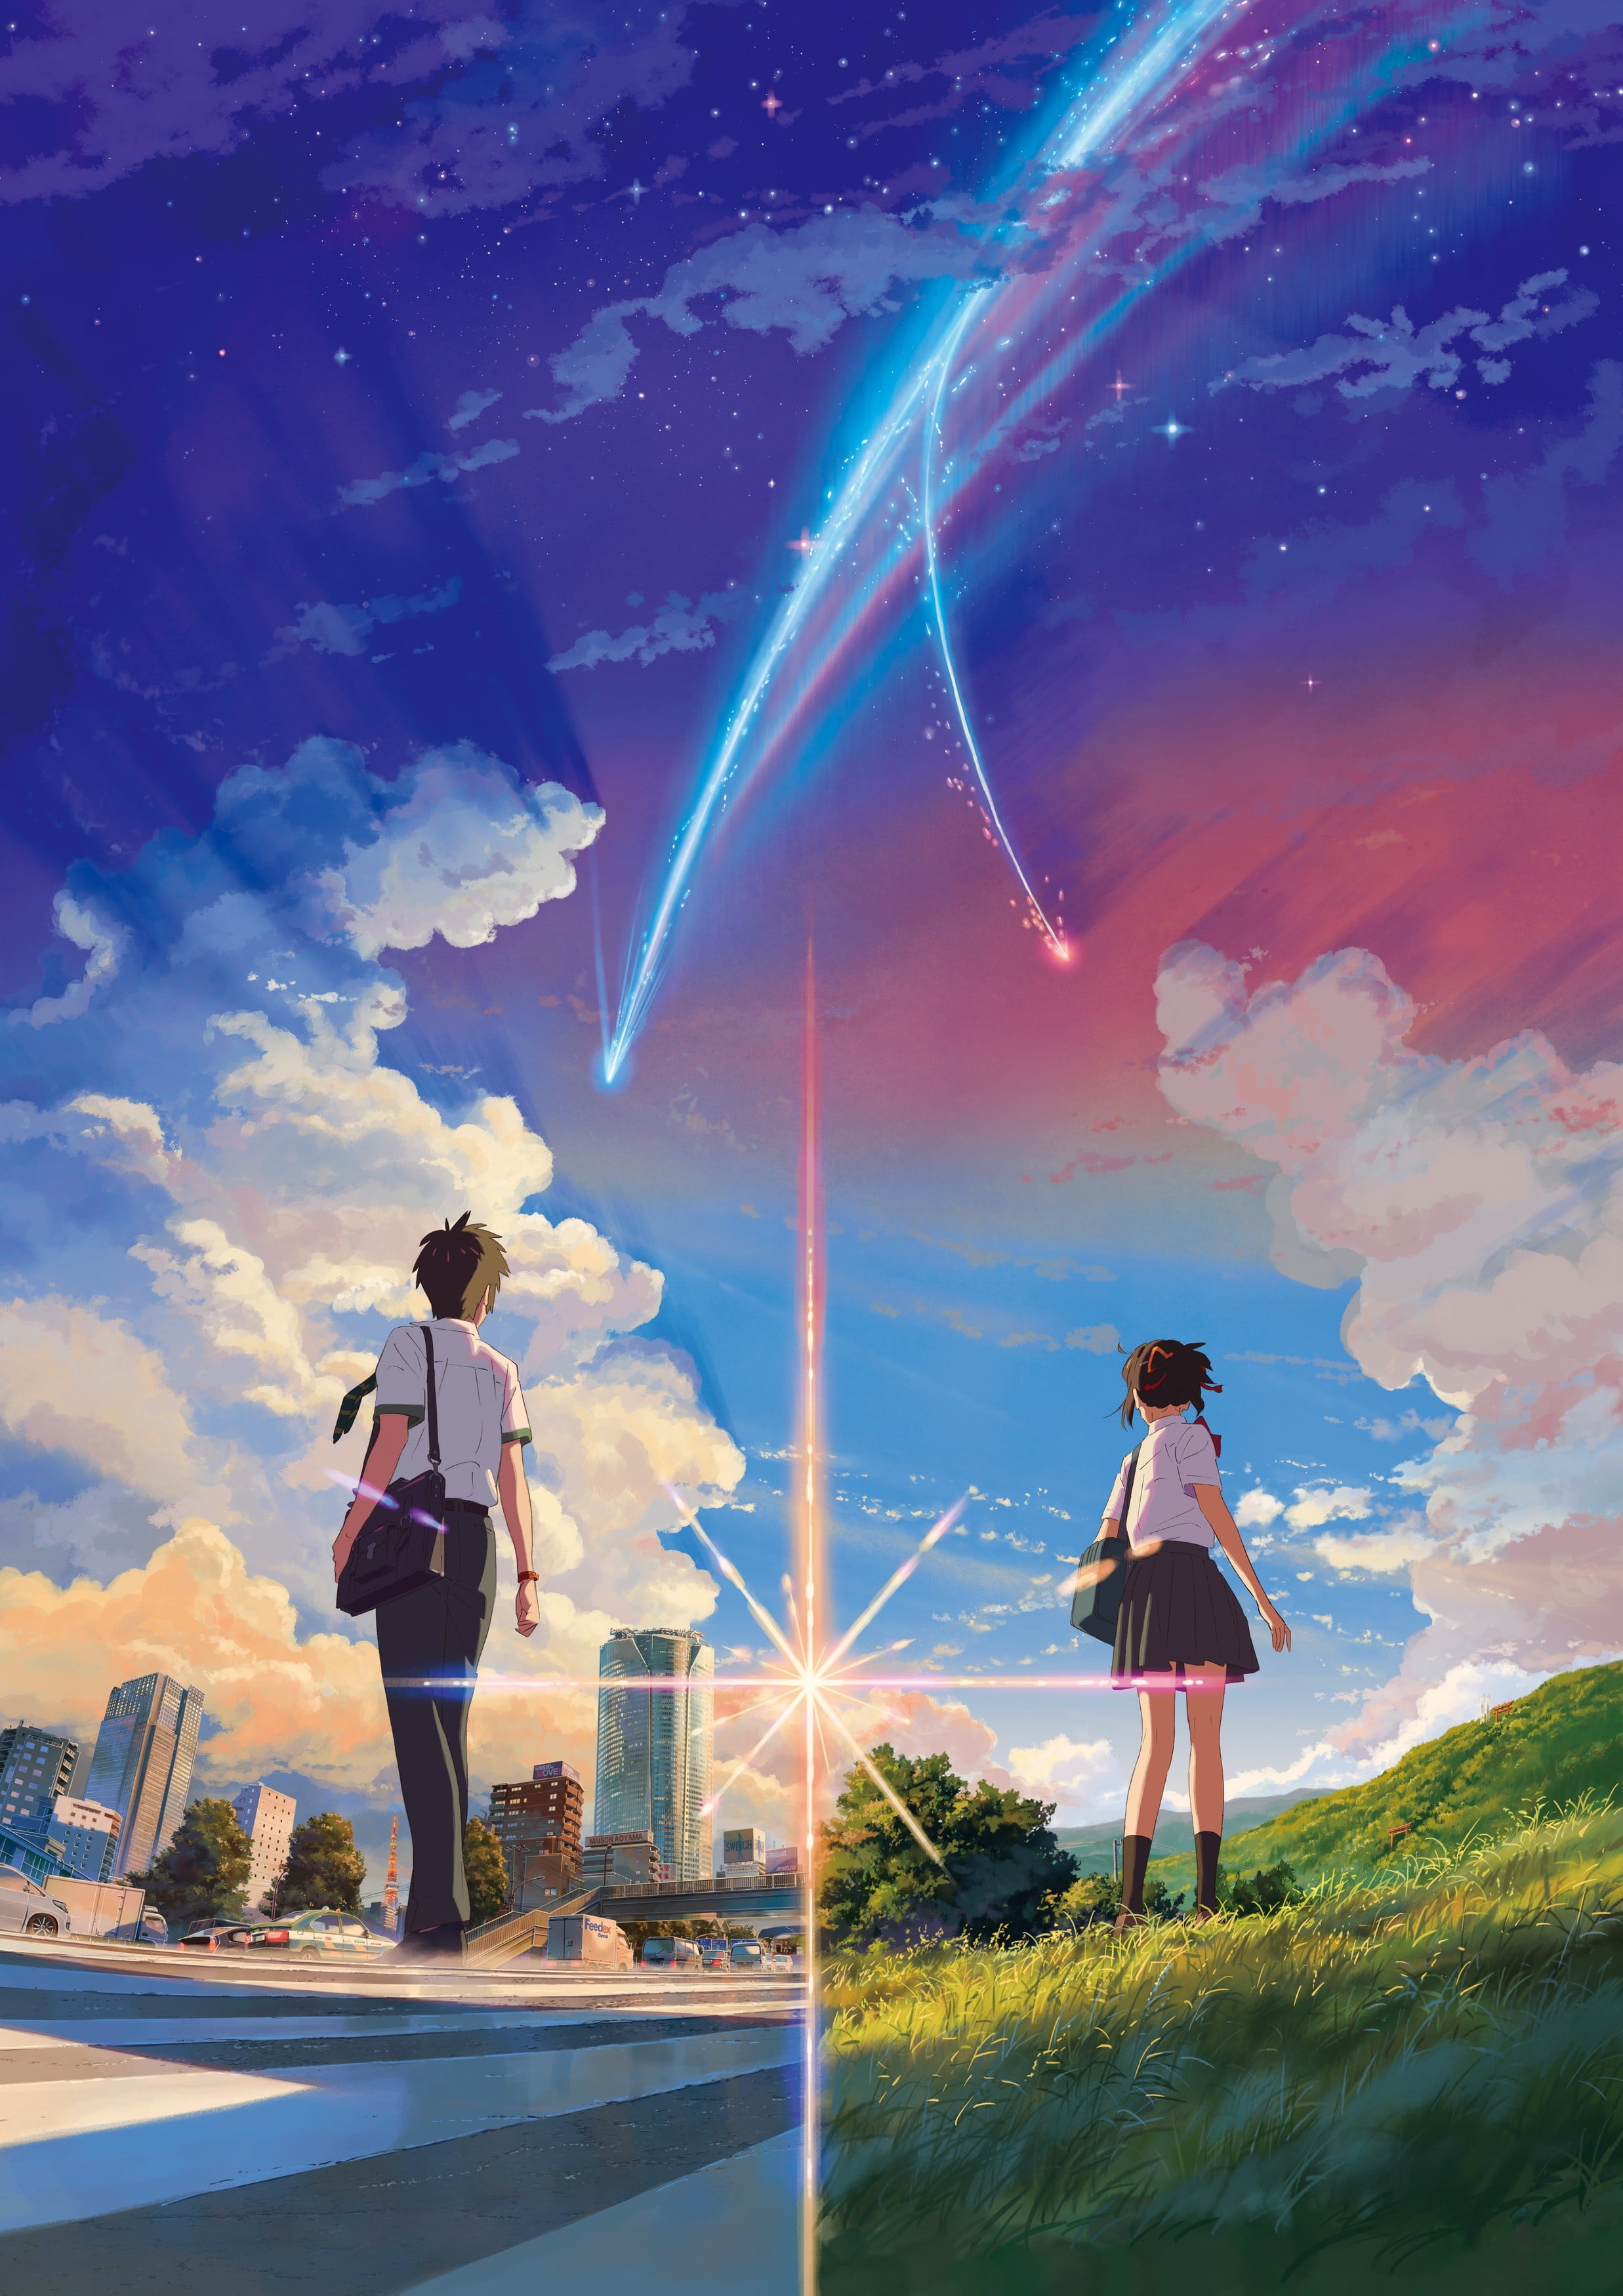 Your Name digital wallpaper, Your Name anime, anime girls, landscape